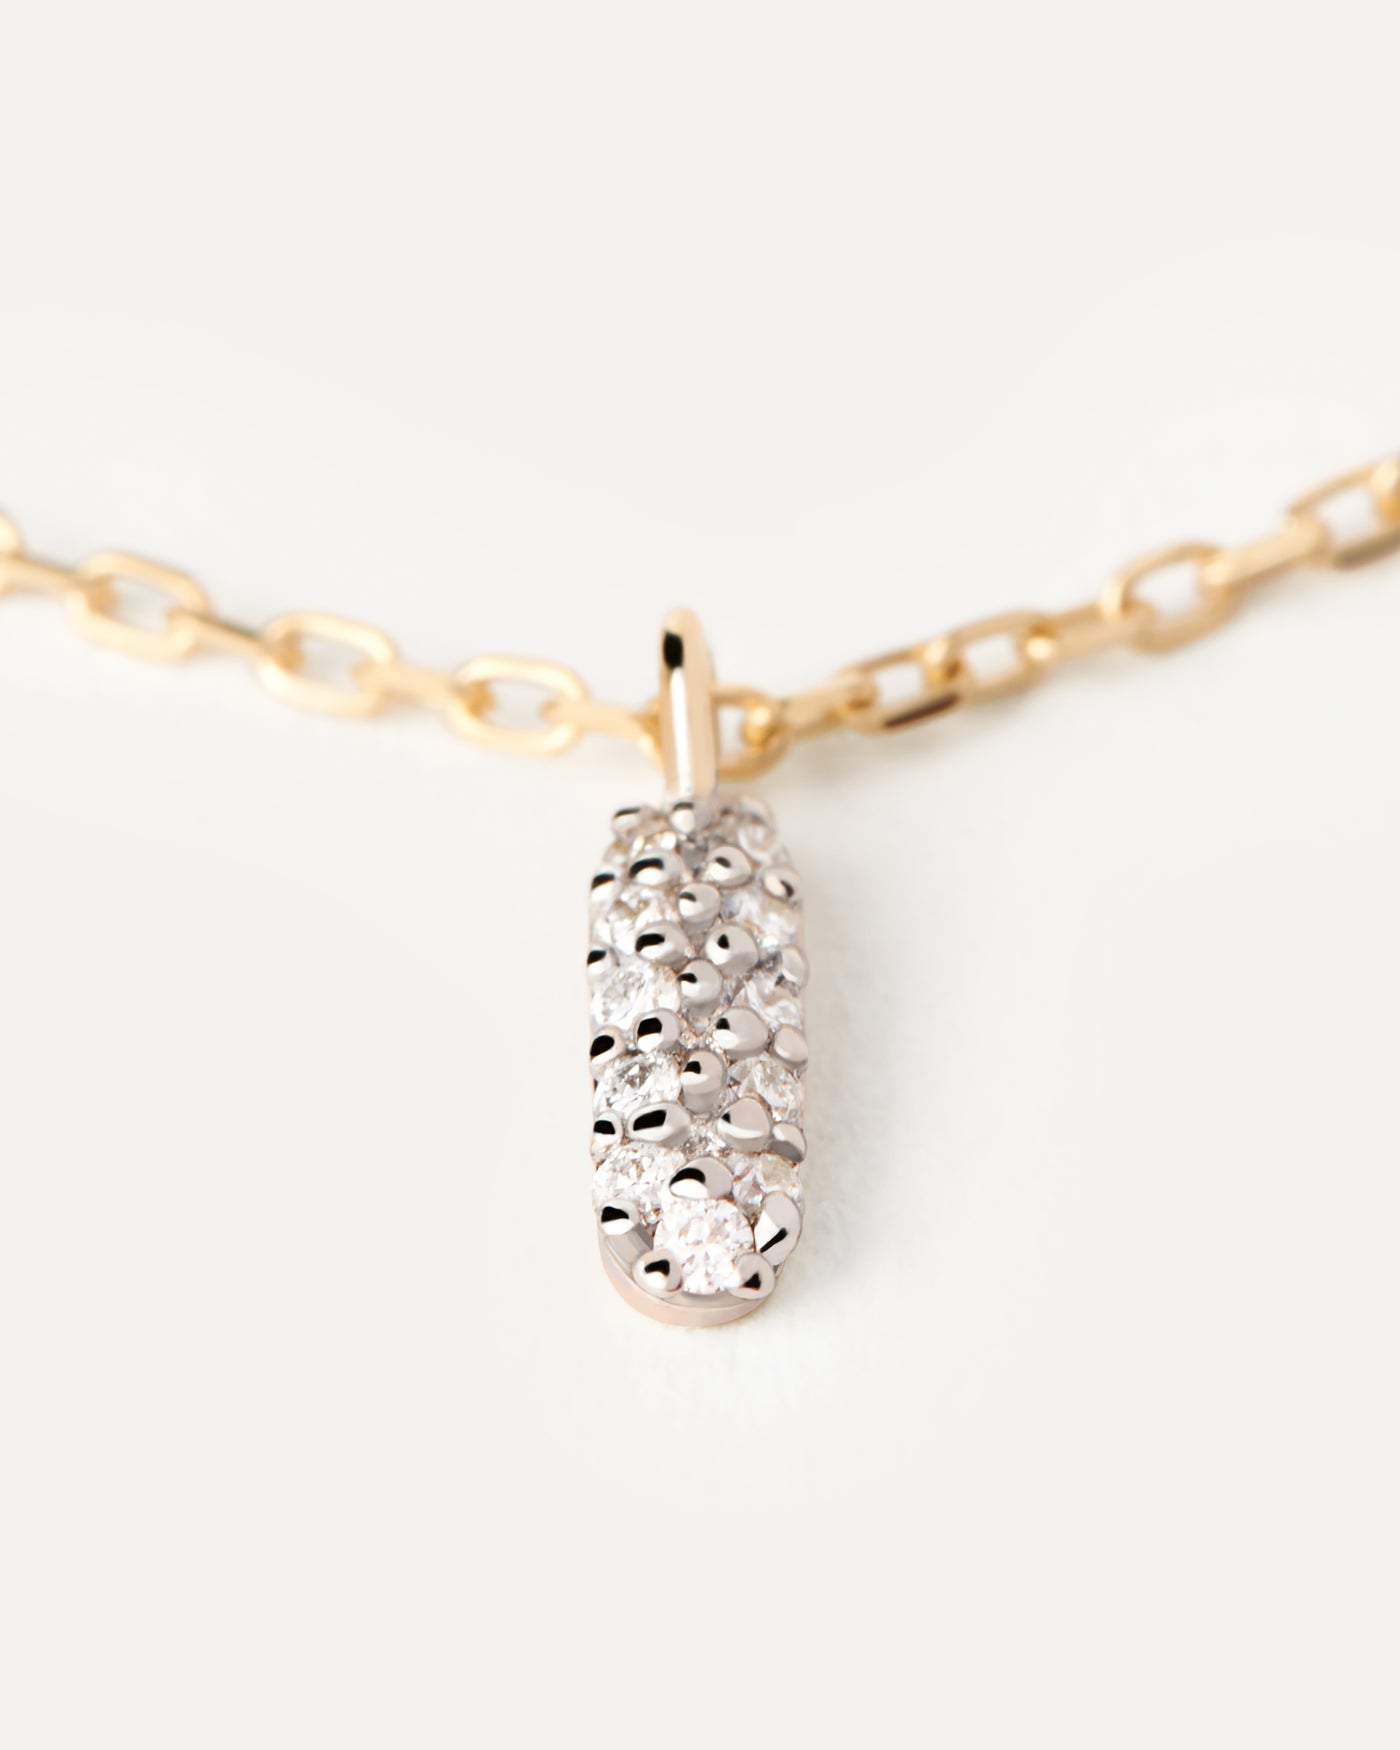 Diamonds and gold Pop necklace. Solid yellow gold chain necklace with oval shape pavé lab-grown diamonds of 0.04 carats . Get the latest arrival from PDPAOLA. Place your order safely and get this Best Seller.